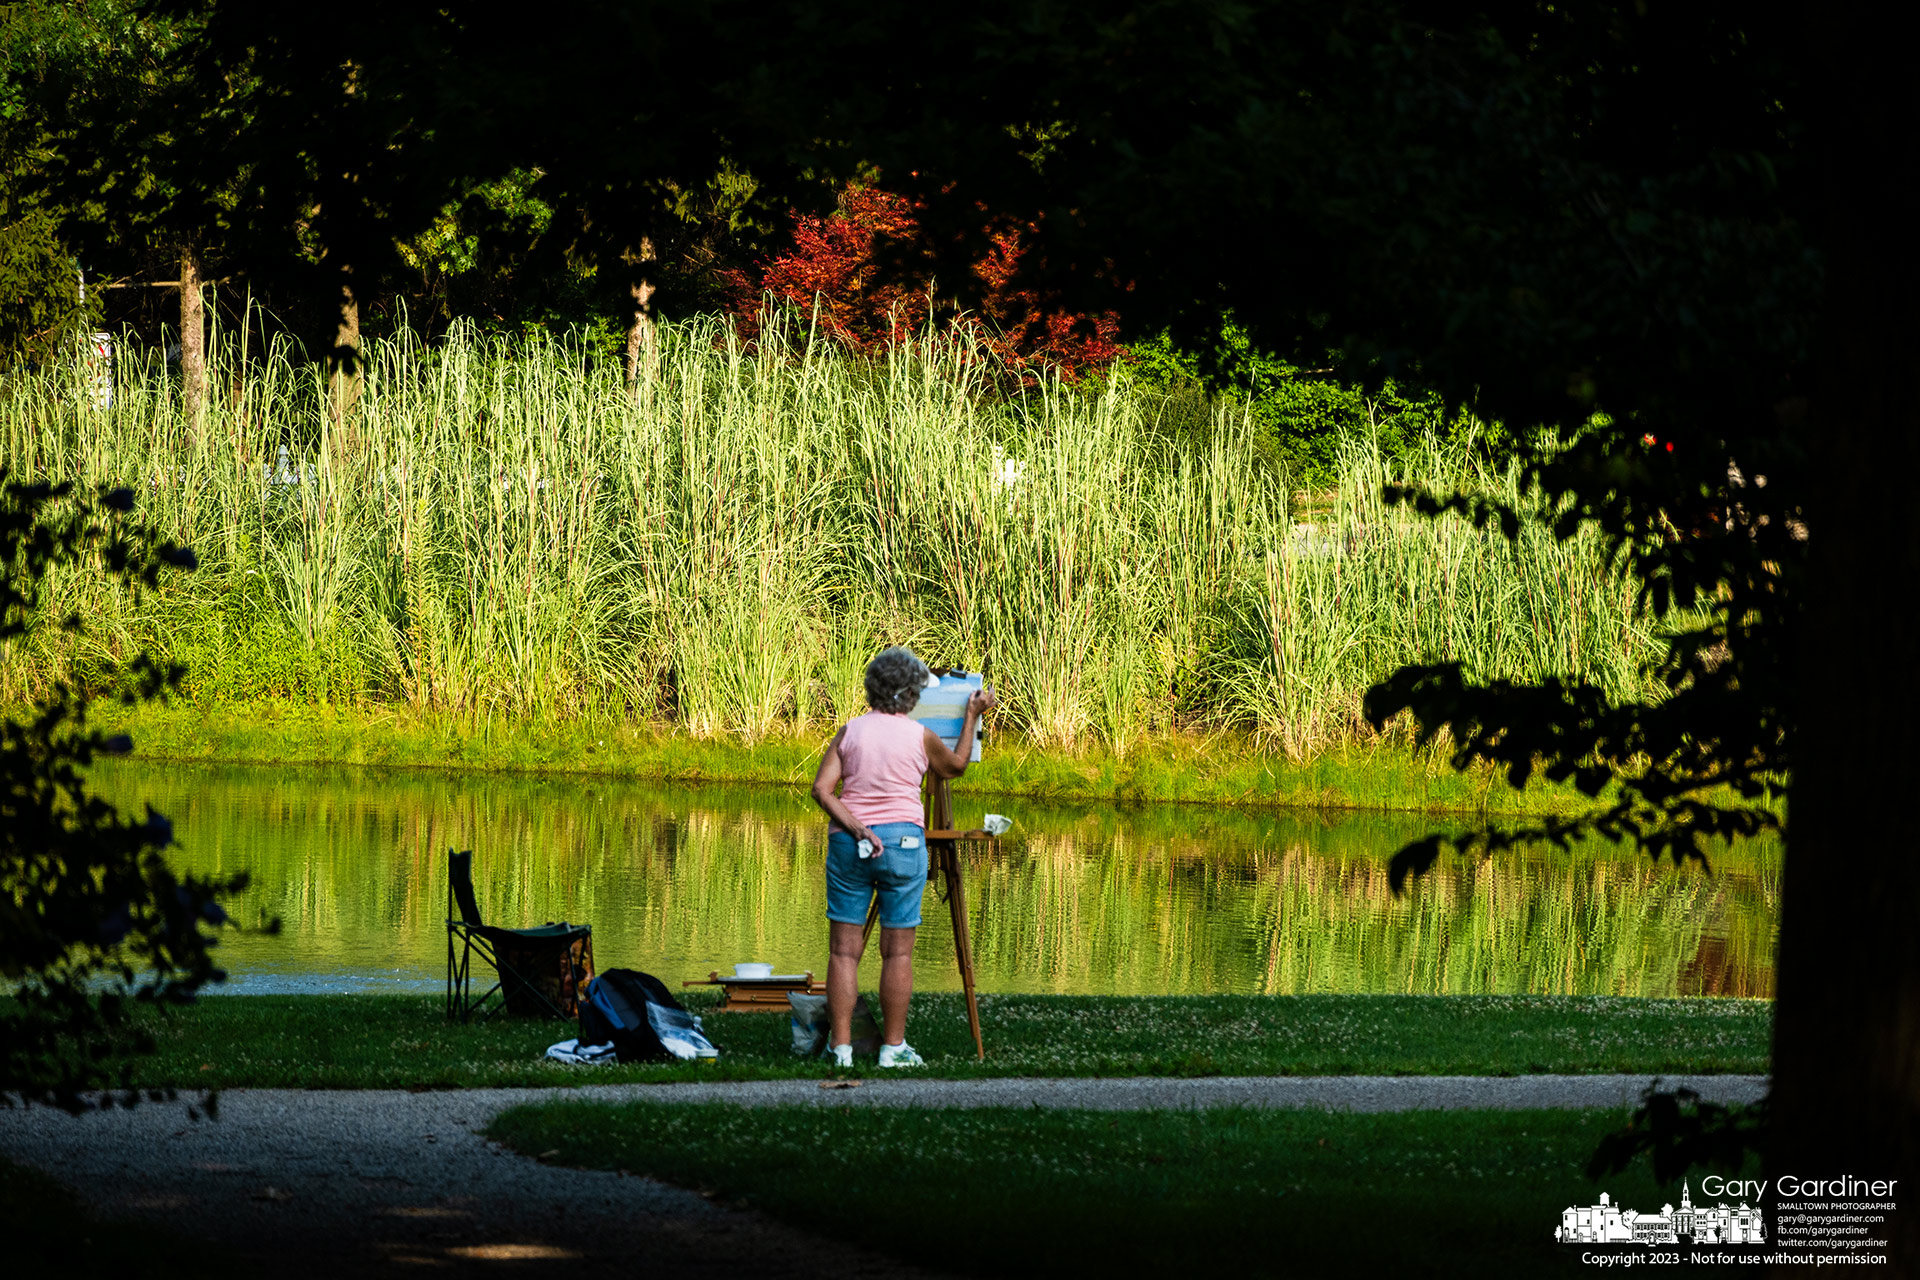 A plein air artist applies chalk pastels to her canvas as she stands in the late afternoon shadows edging over the pond at Heritage Park. My final Photo for August 3, 2023.